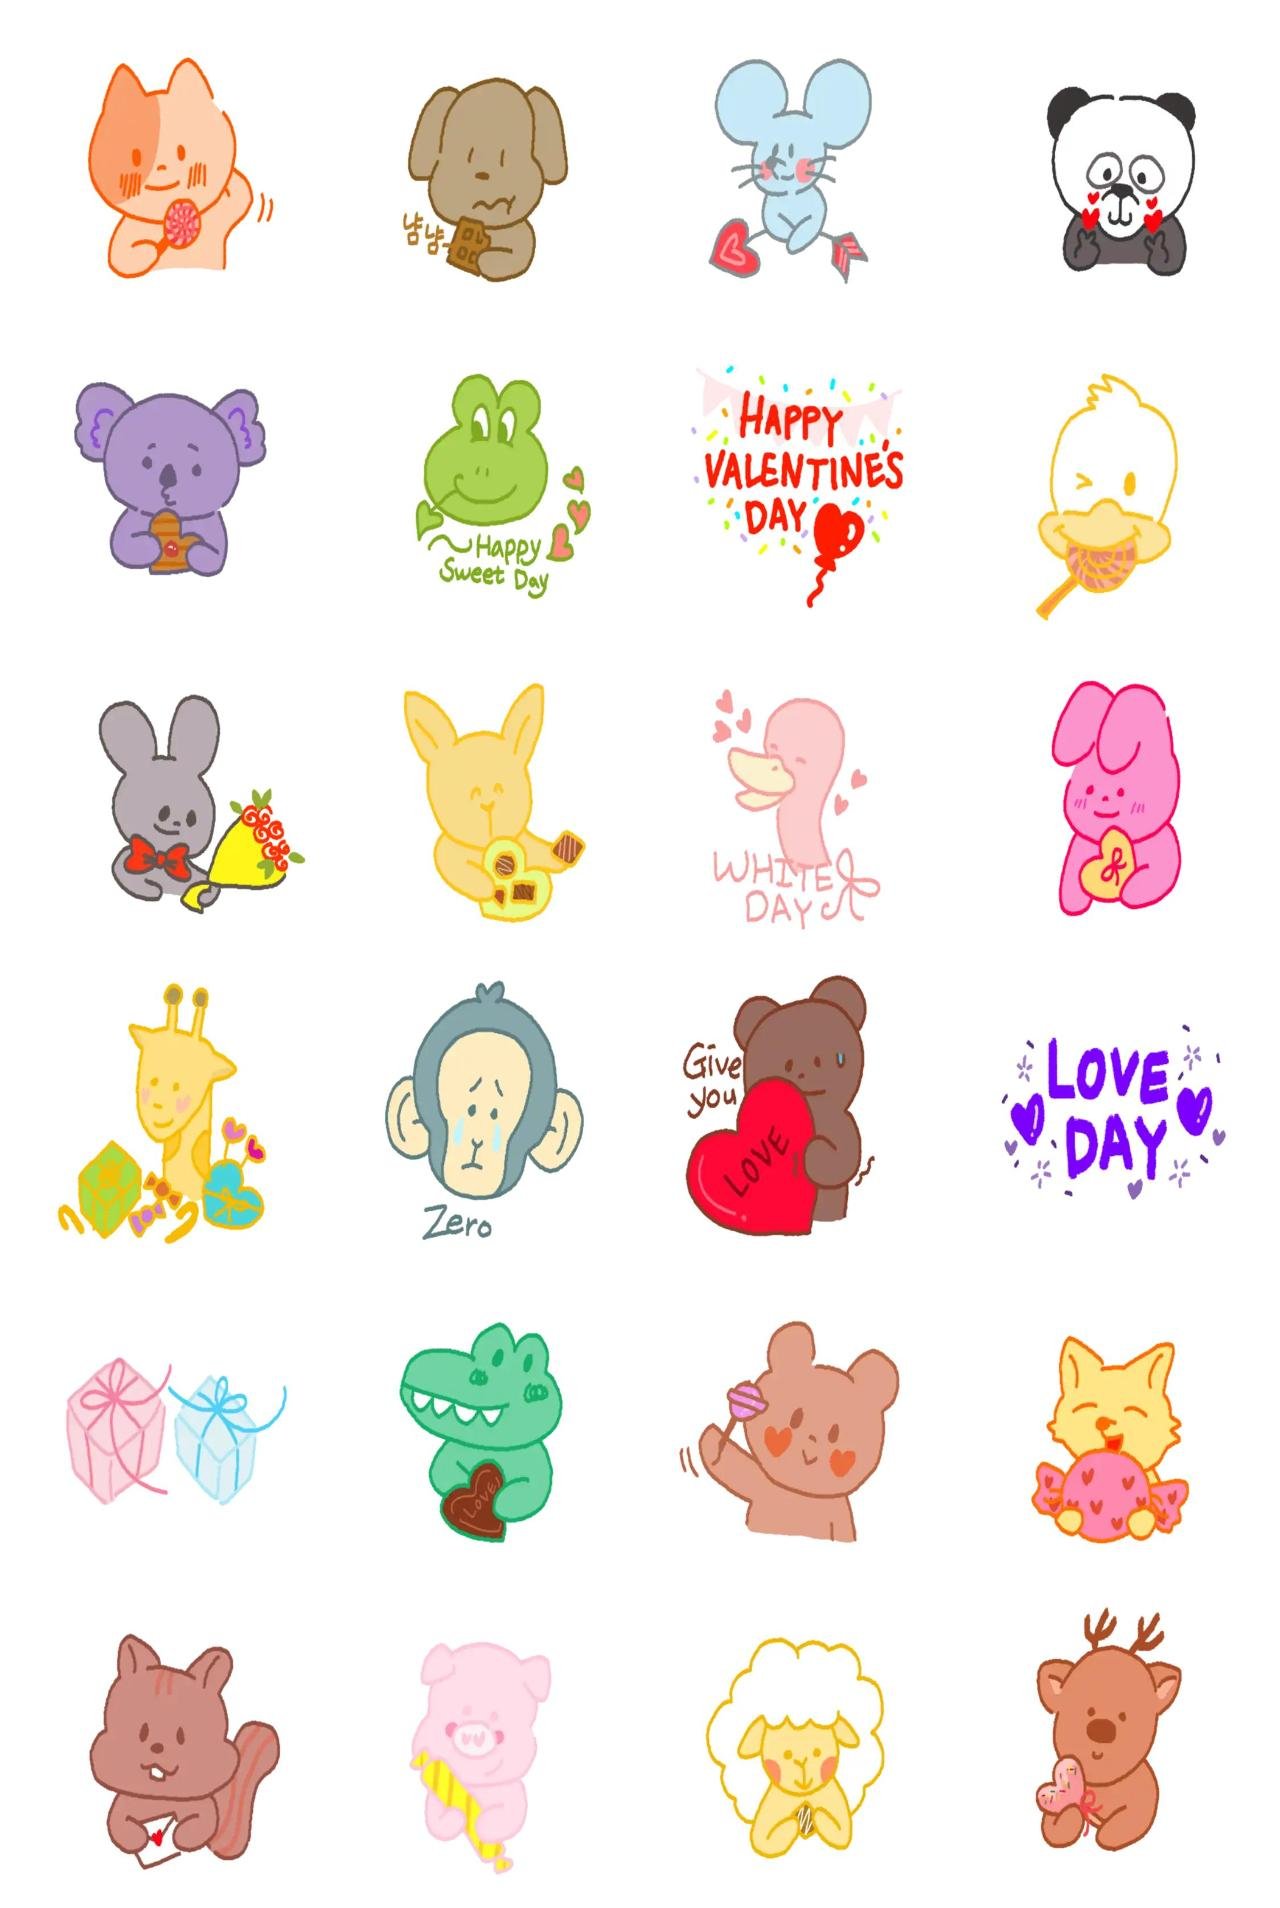 Sweet Day Animation/Cartoon sticker pack for Whatsapp, Telegram, Signal, and others chatting and message apps